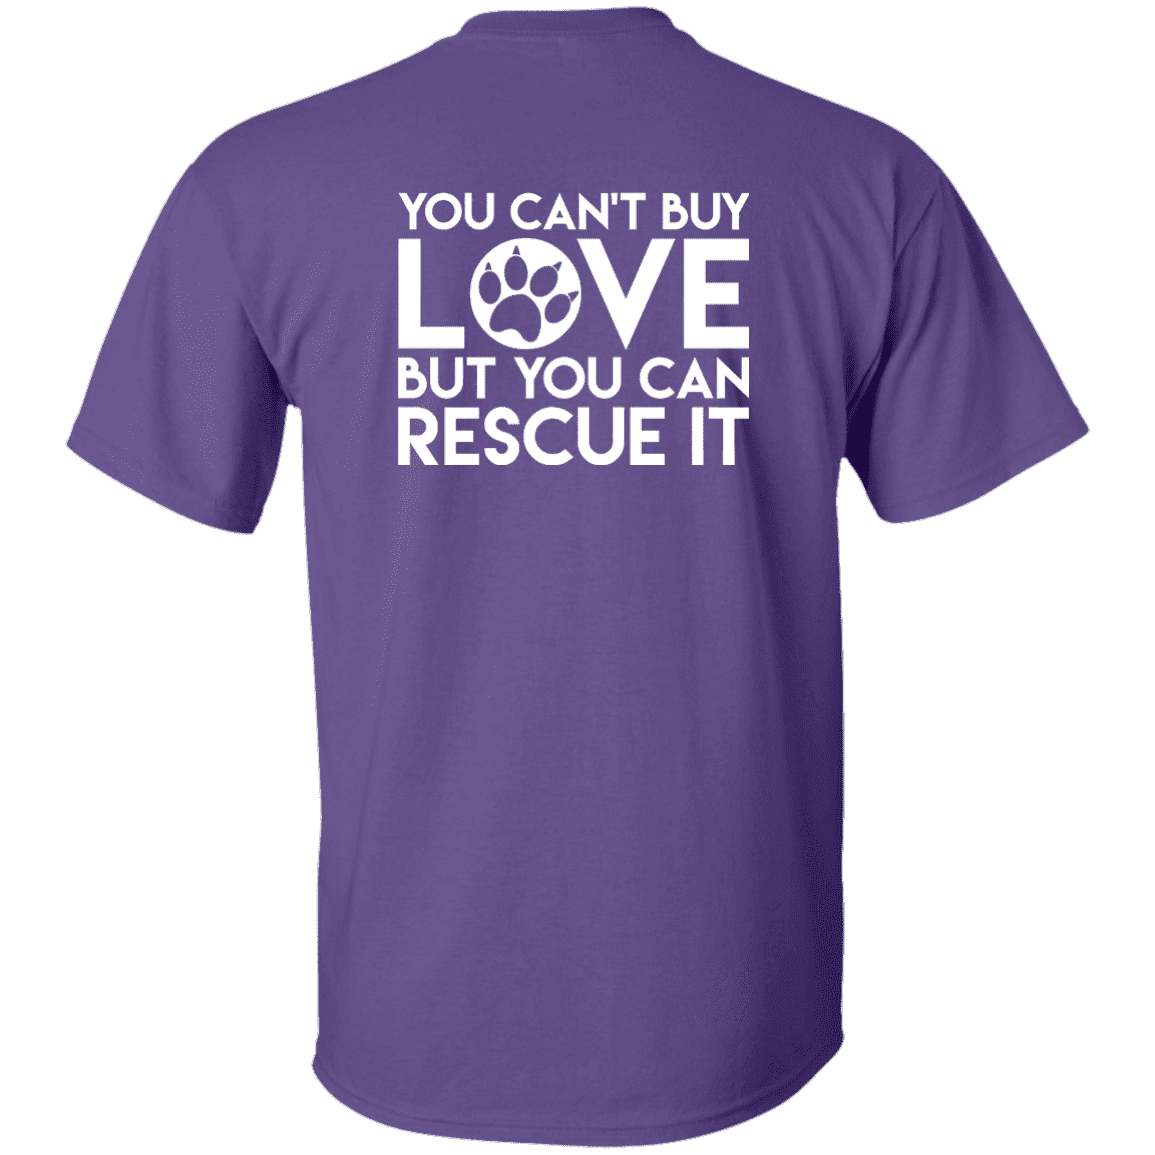 You Can't Buy Love - T Shirt.